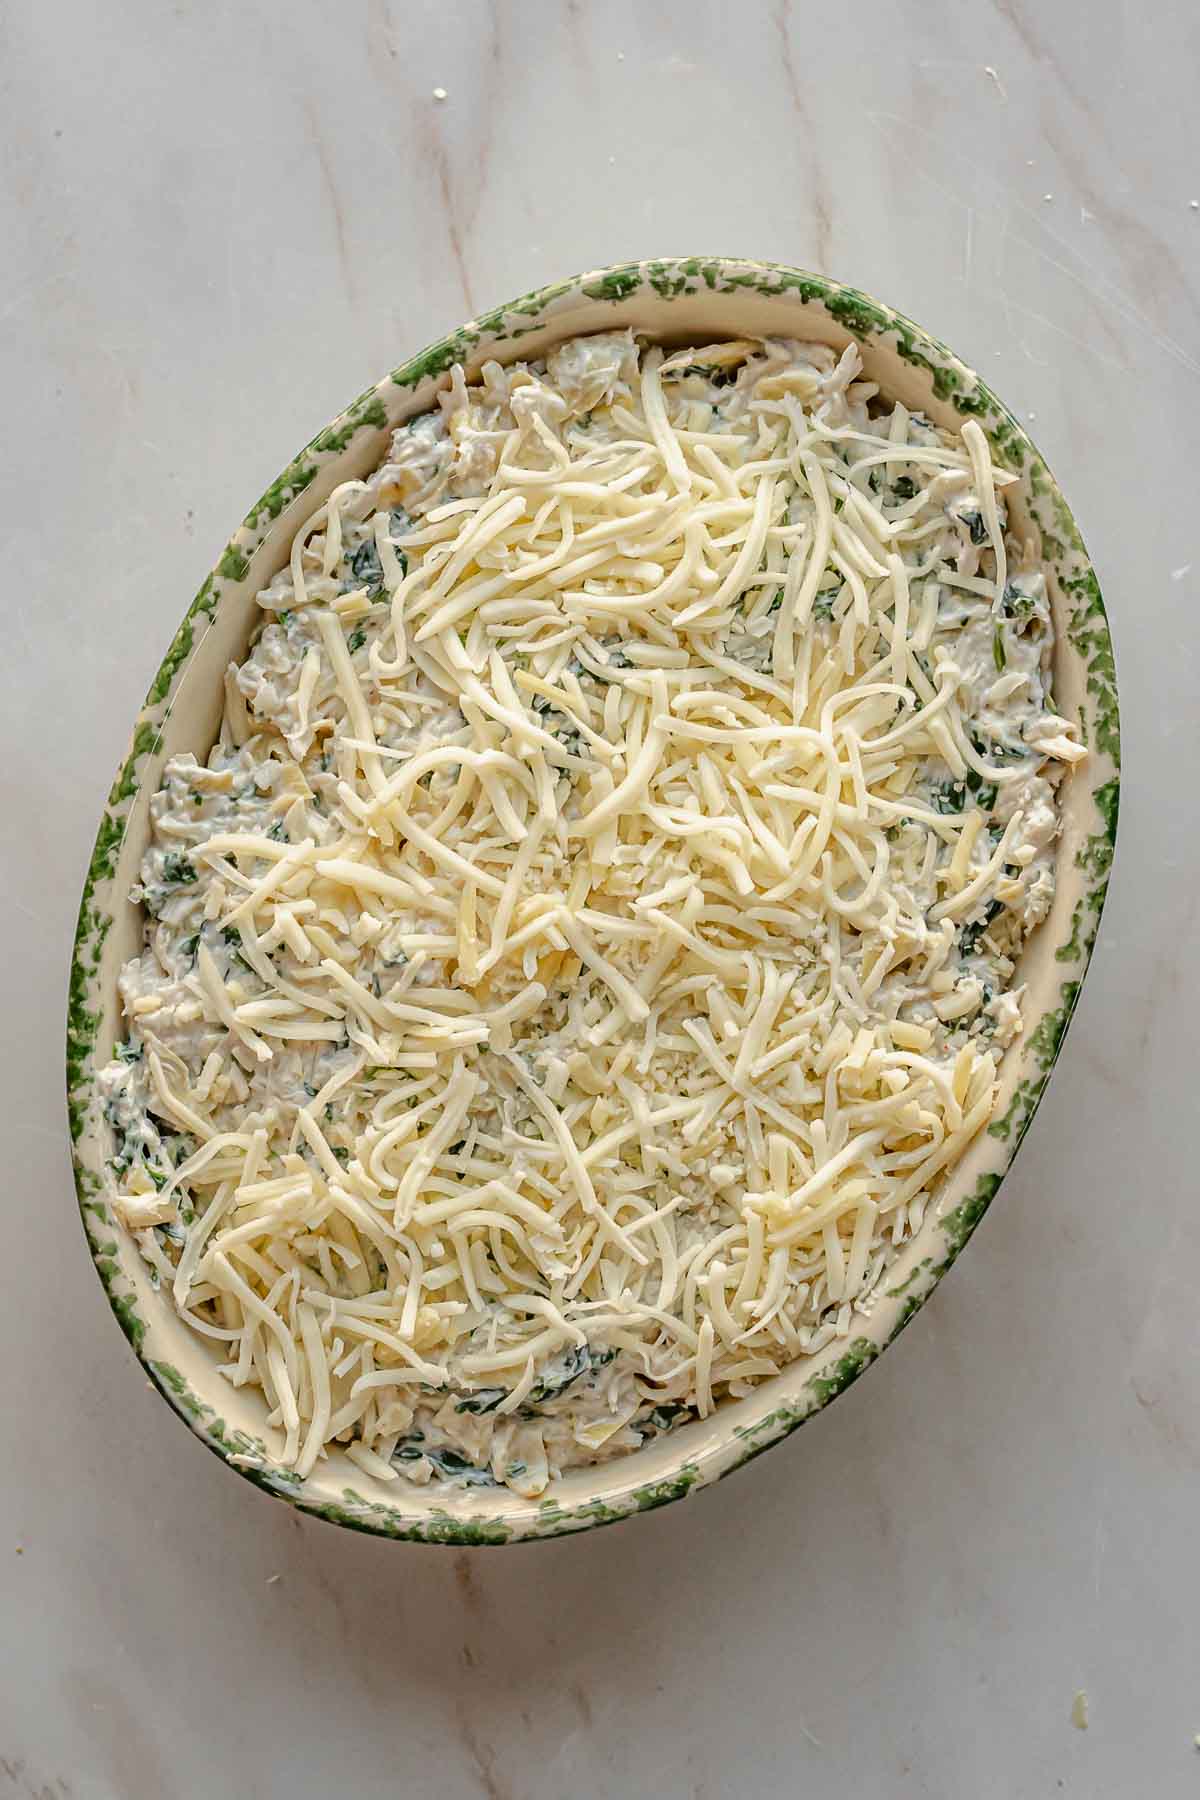 Shredded cheese sits on top of crab spinach dip prior to baking.